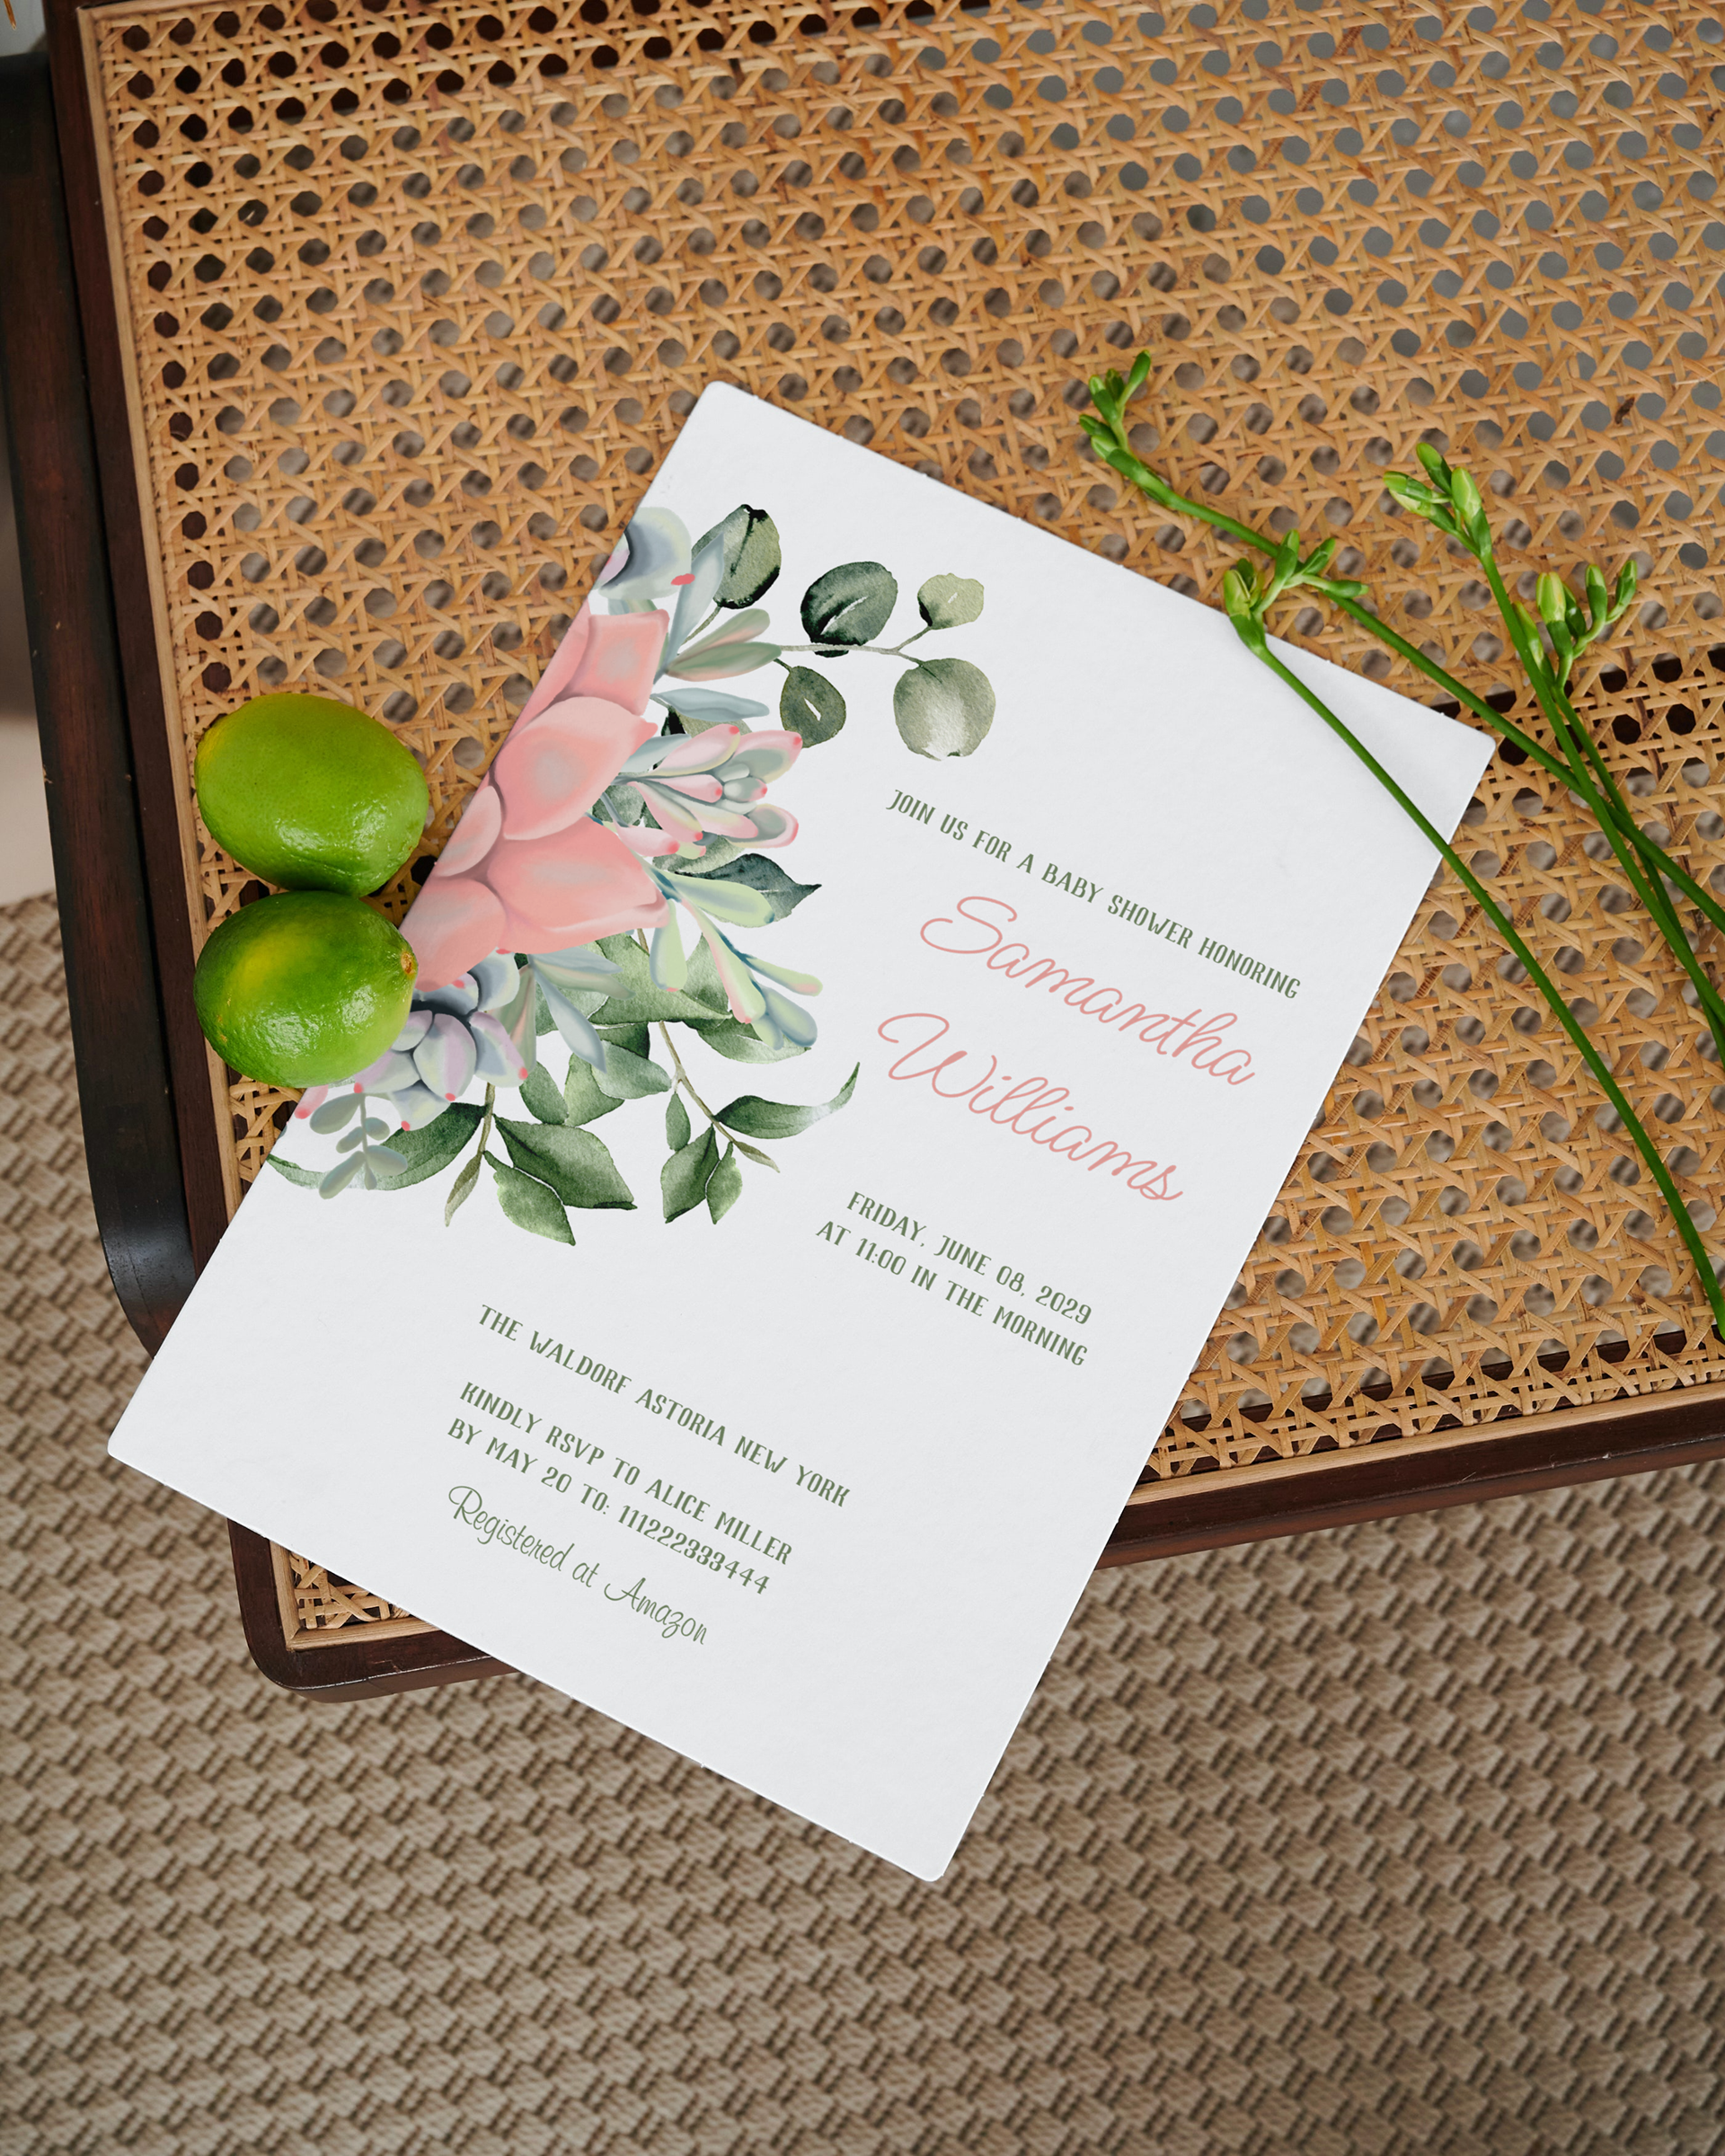 Elegant Blush Pink Peach Succulent with greenery eucalyptus baby shower invitation with limes on photo